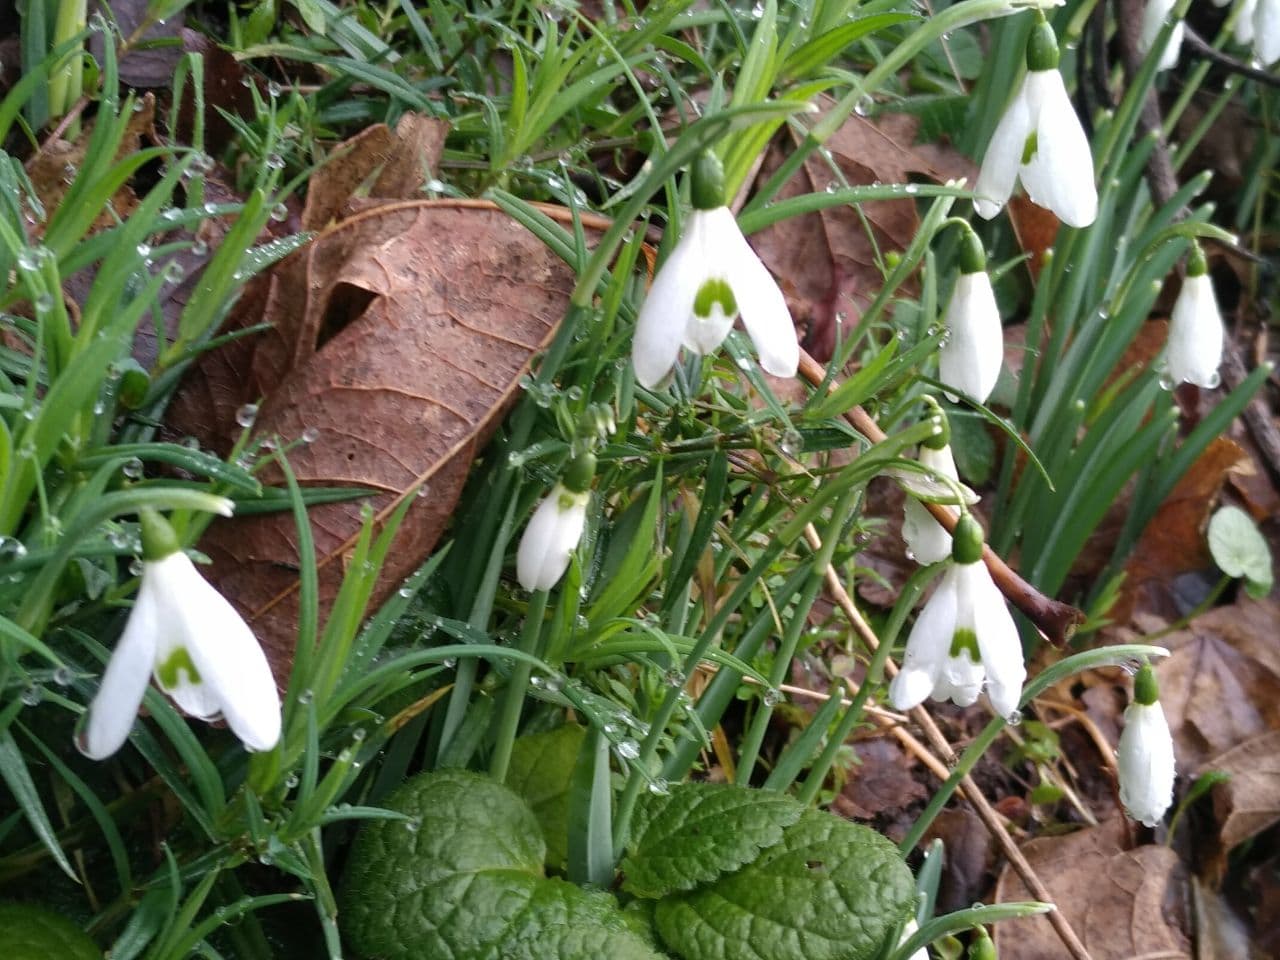 Snowdrops near Eco-Gites of Lenault, Normandy, France